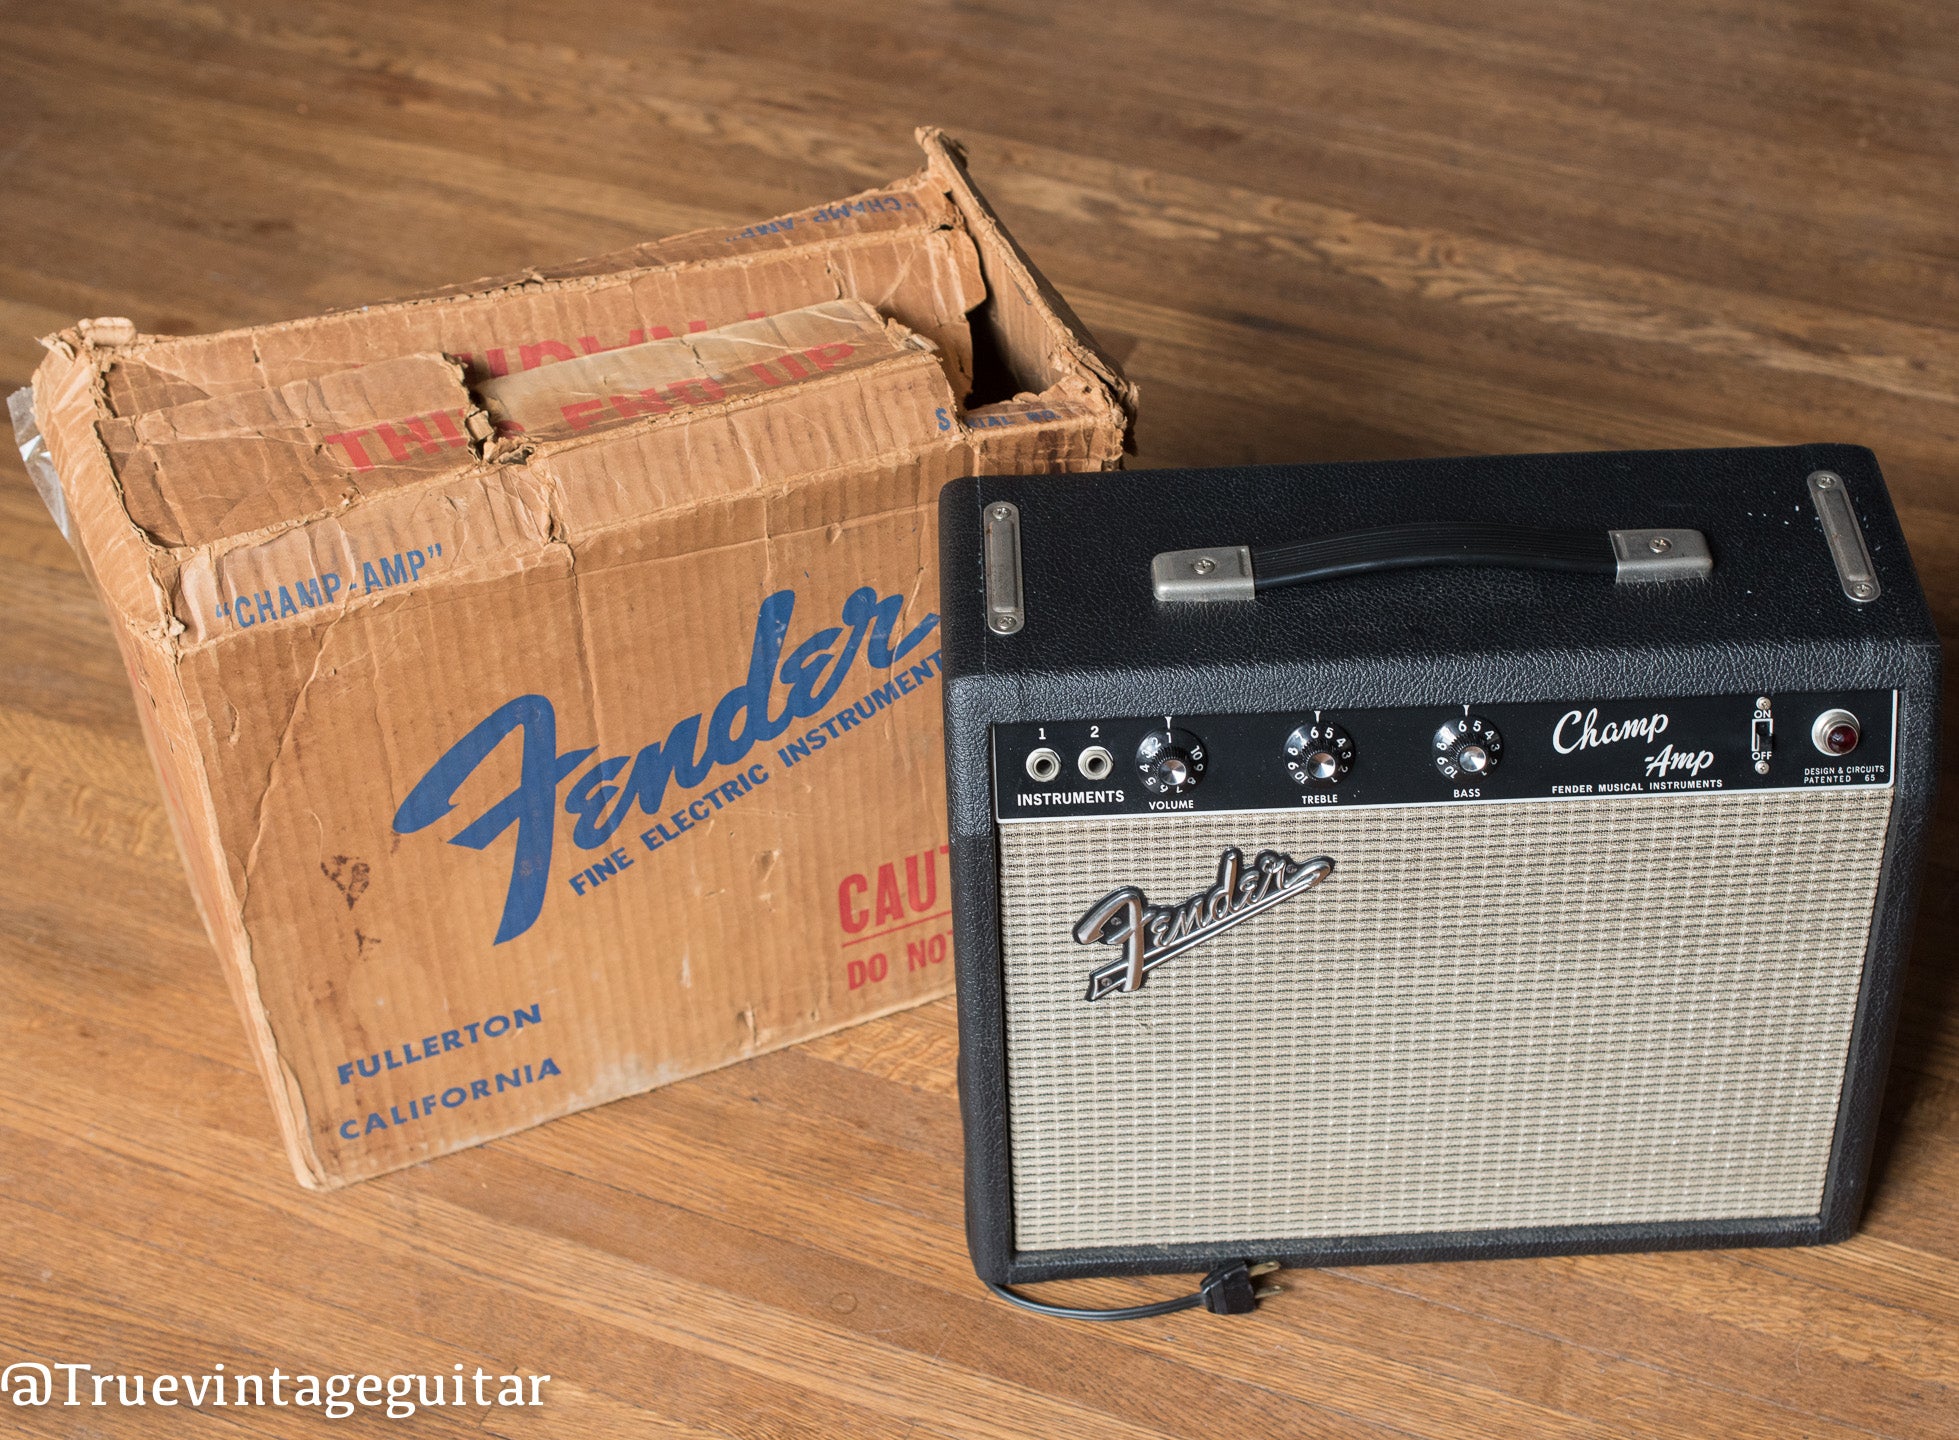 Vintage 1966 Fender Champ amp with shipping container